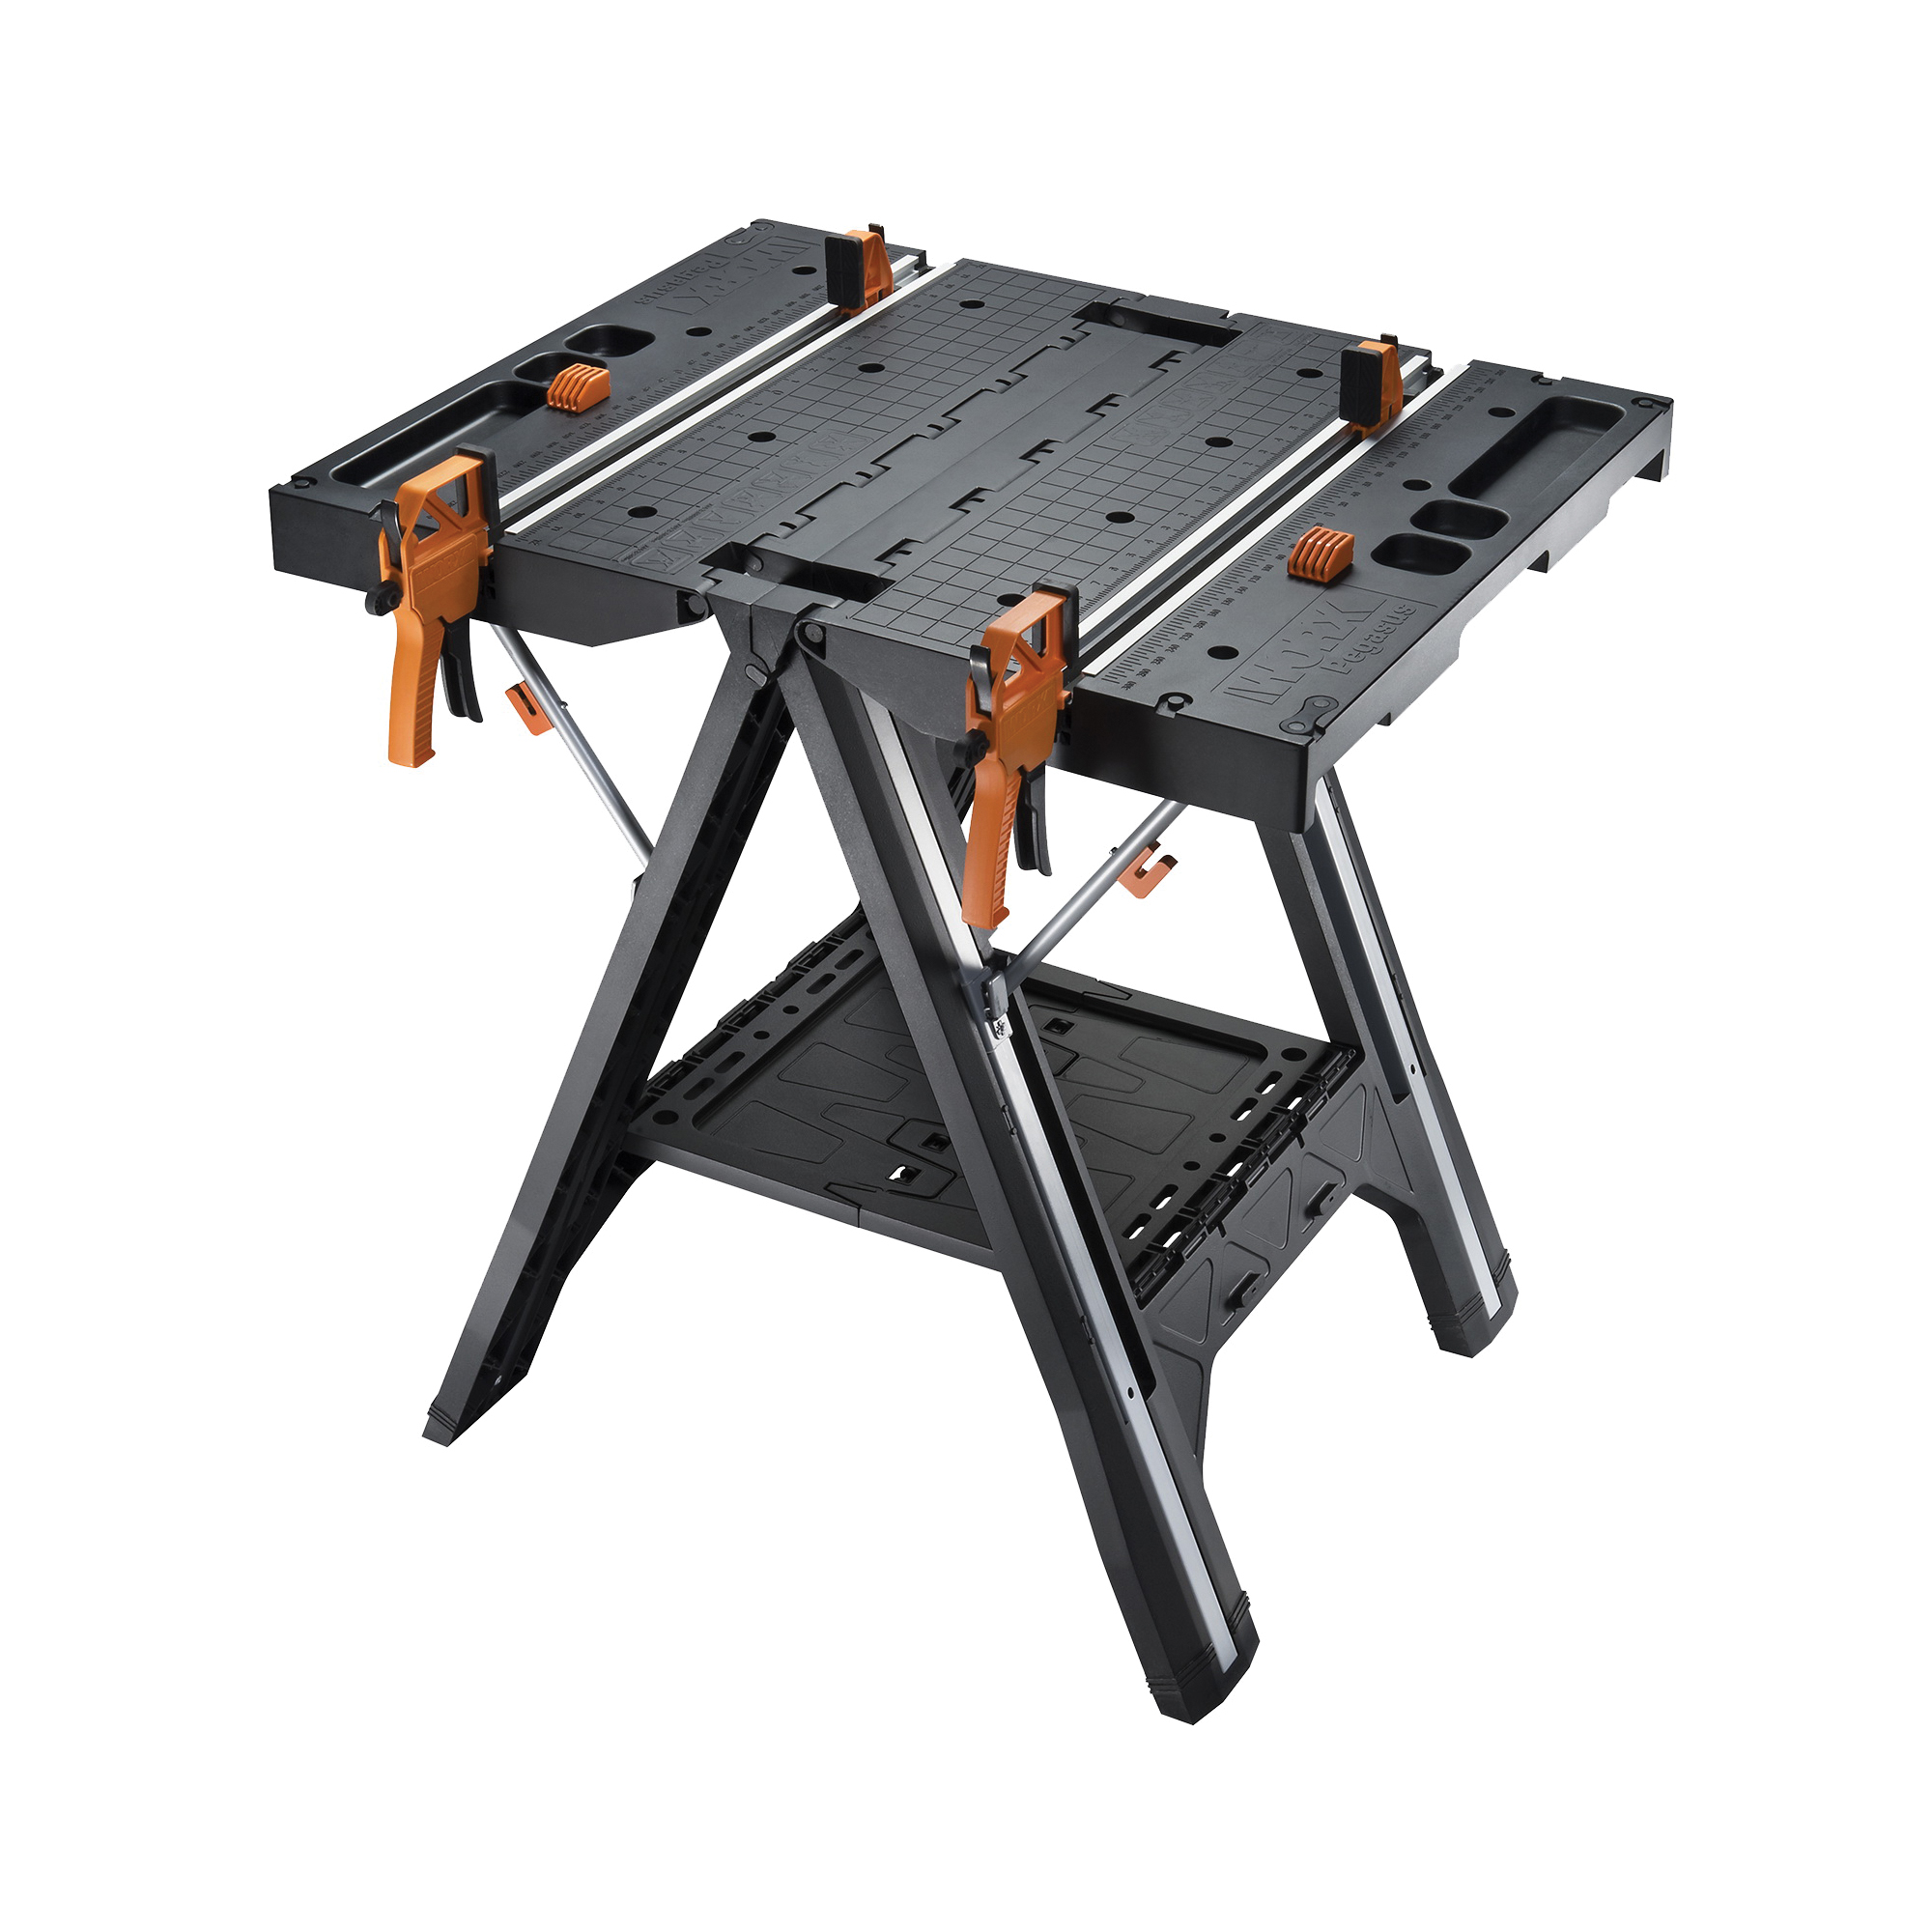 WX051 Folding Work Table with Quick Clamps, 25 in OAW, 31 in OAH, 300 lb, Plastic Tabletop